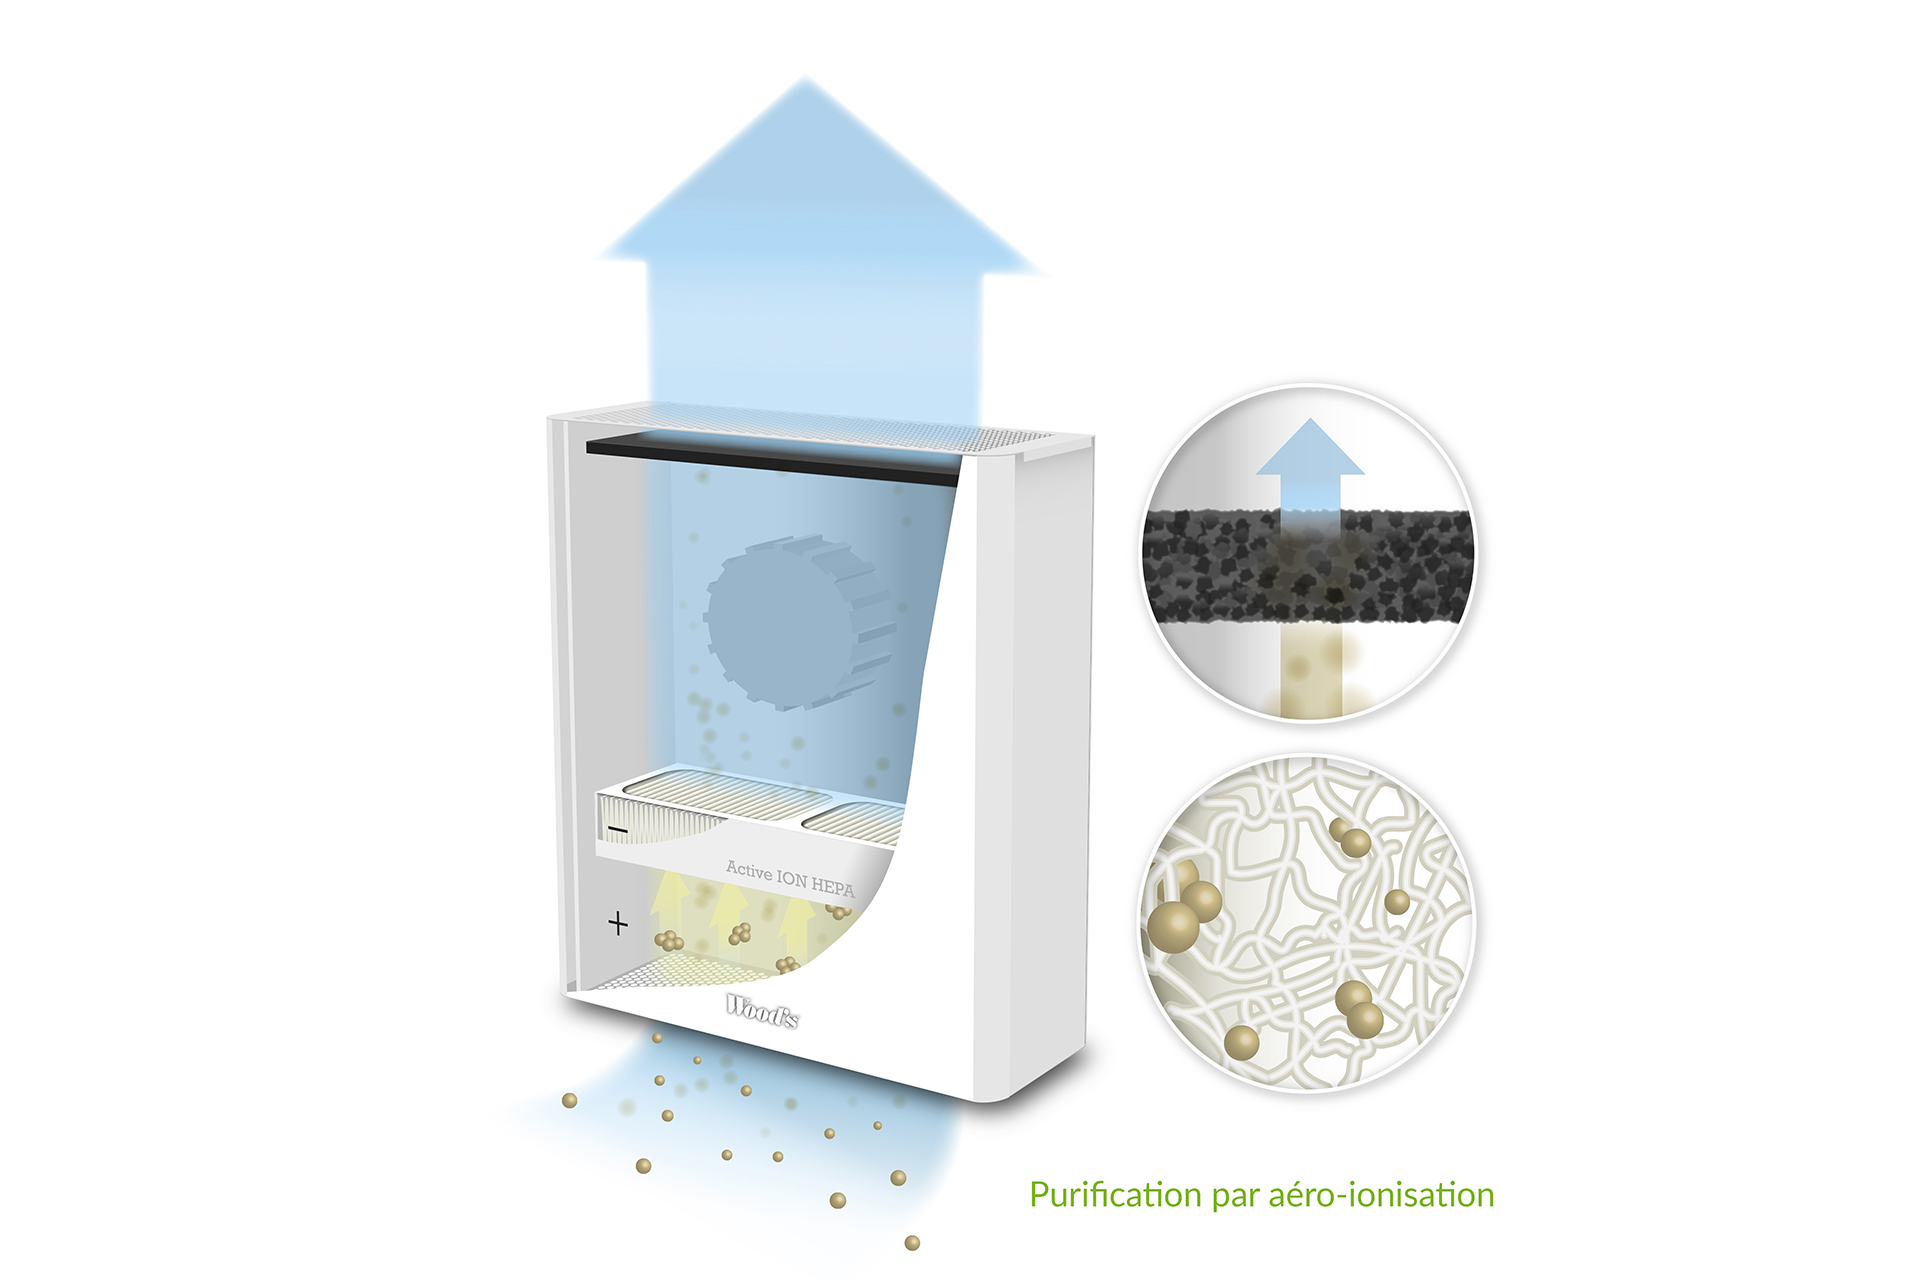 'Active ion Hepa’ filtration purifier